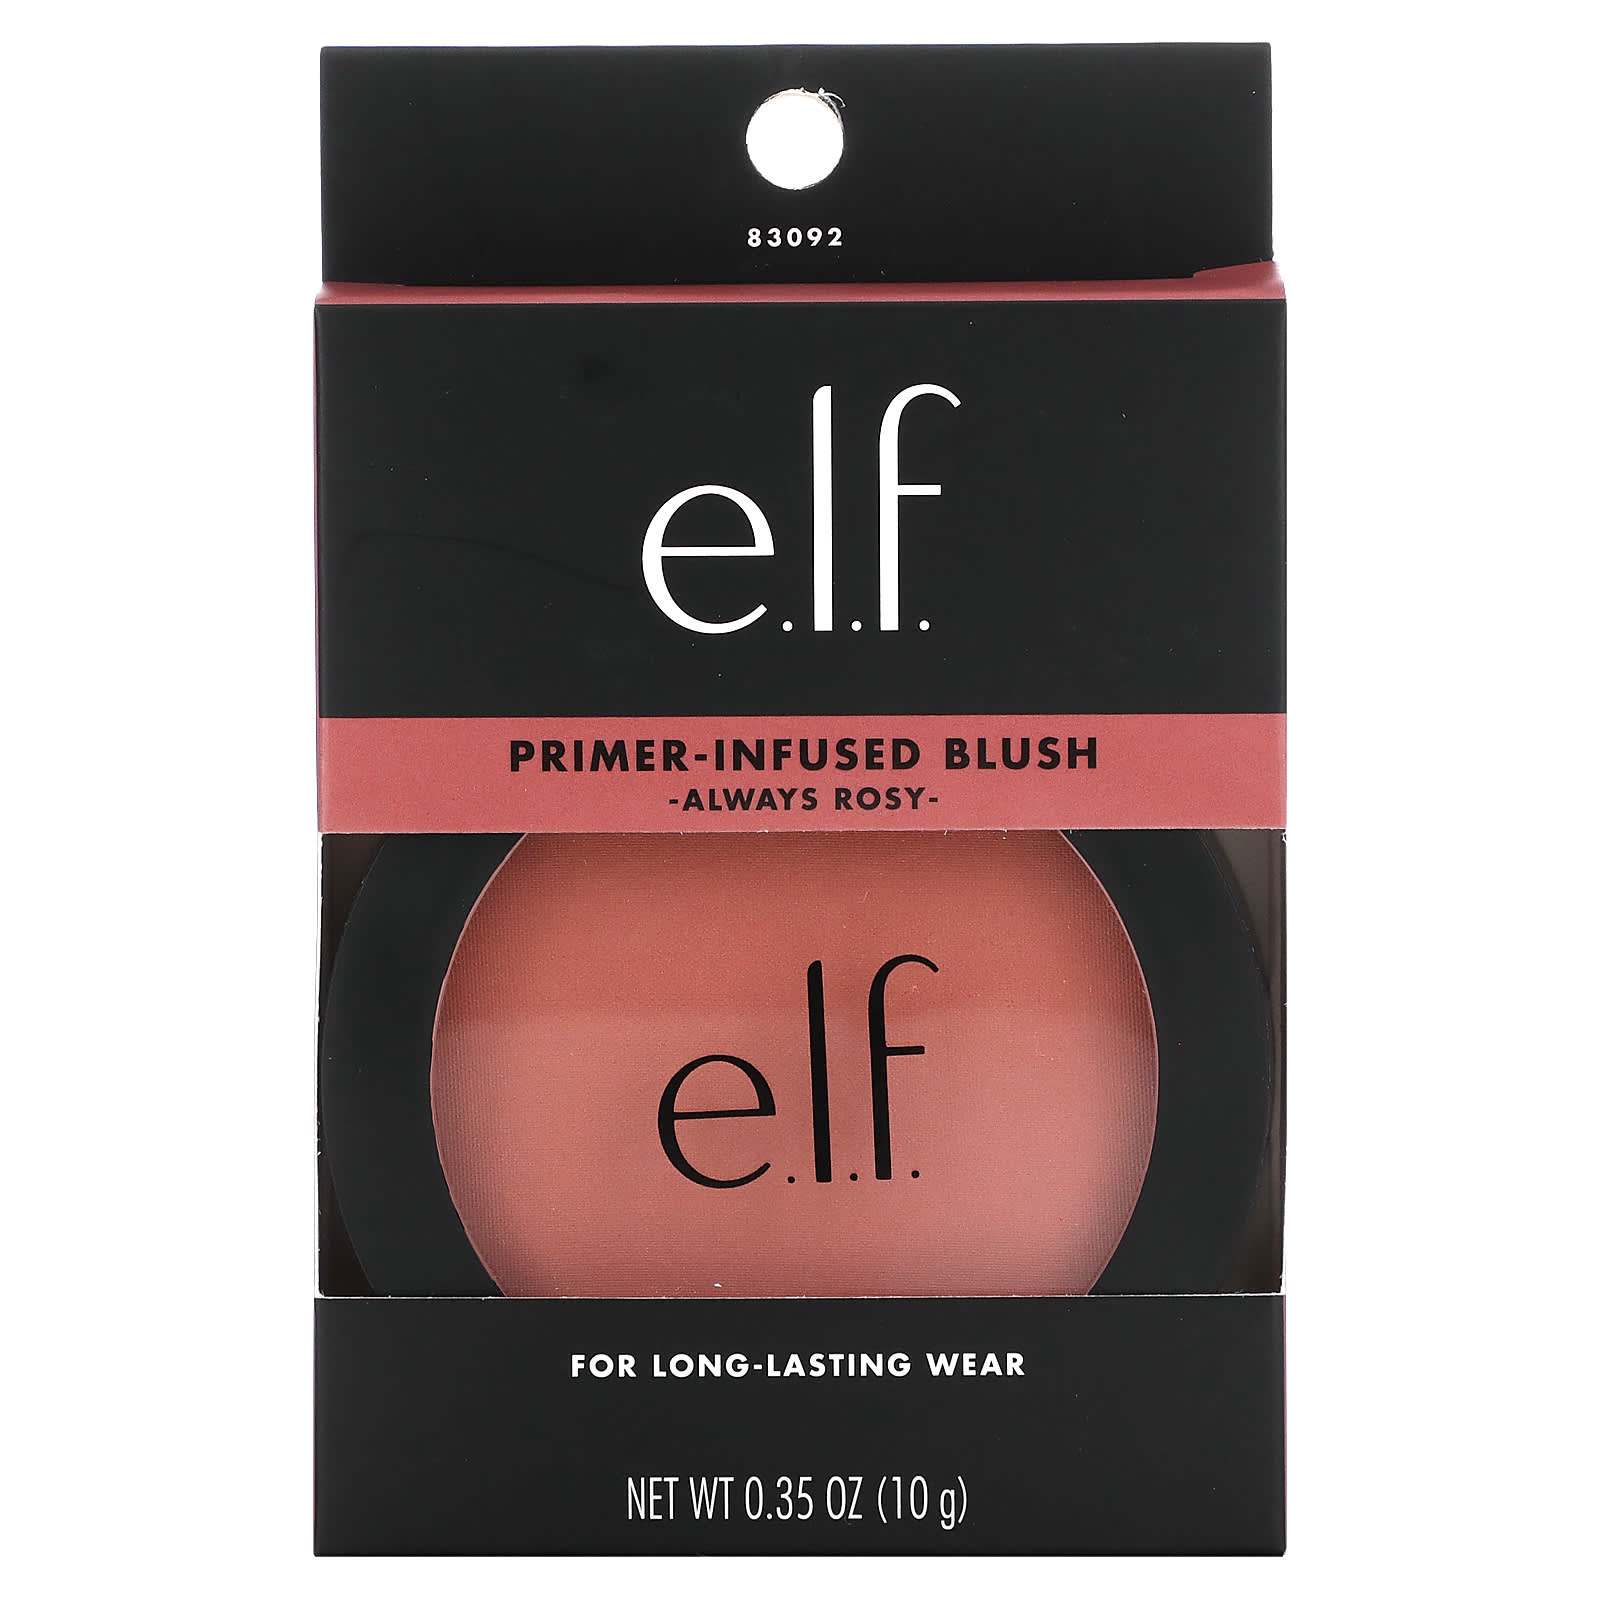 E.L.F., Primer-Infused Blush, Always Rosy, 0.35 oz (10 g) (Discontinued ...